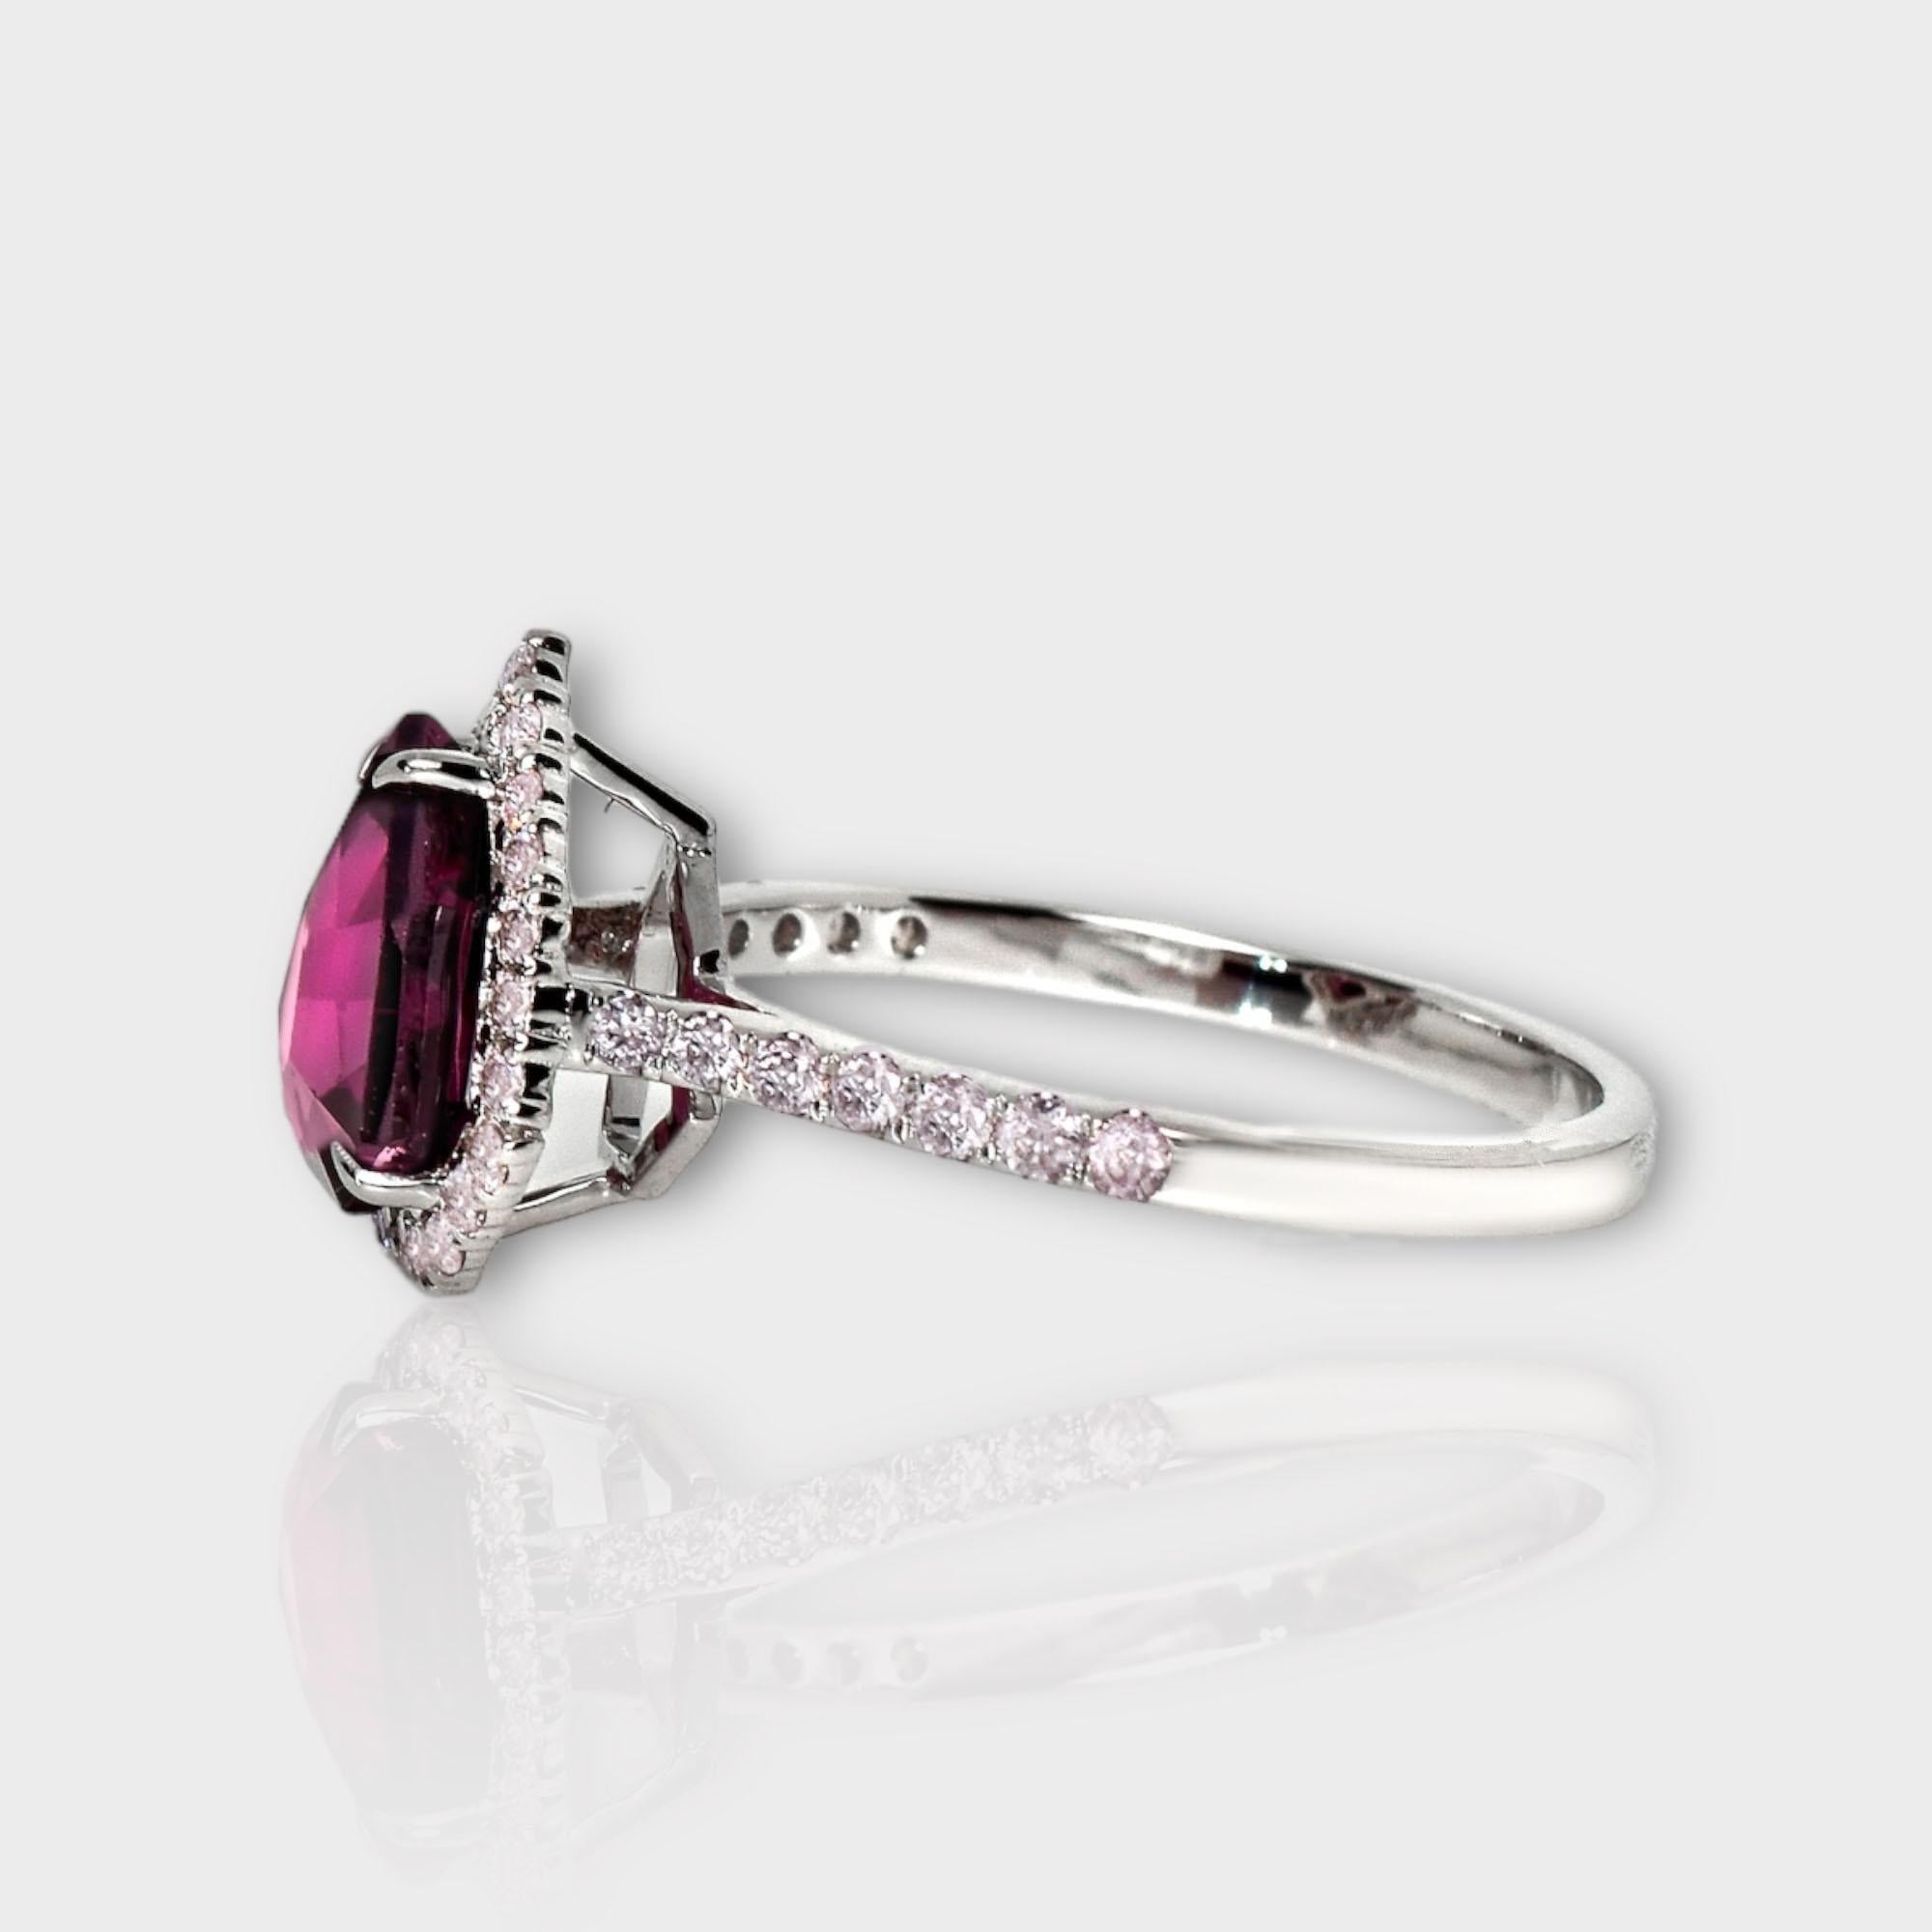 IGI 14K 2.10 Ct Purple Spinel&Pink Diamonds Antique Engagement Ring In New Condition For Sale In Kaohsiung City, TW